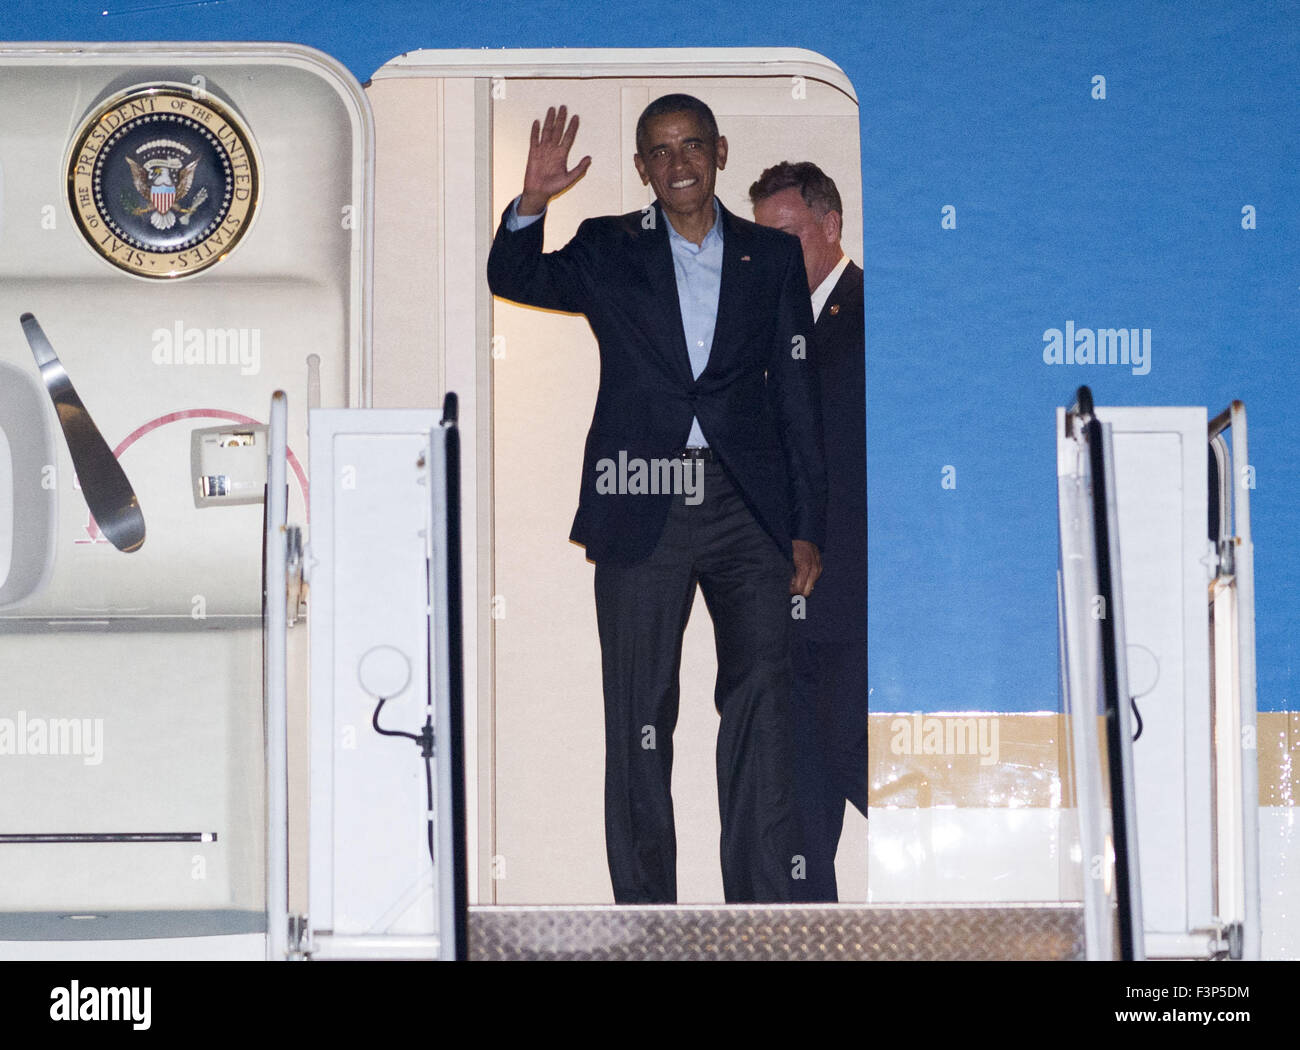 San Diego, California, USA. 10th Oct, 2015. U.S. President Barack Obama arrives aboard Air Force One at Marine Corps Air Station Miramar in SanDIego on Saturday afternoon. Obama, on a whirlwind Pacific Coast trip, traveled to Oregon on Friday, arriving in San Francisco on Friday evening with plans for Los Angeles and San Diego on Saturday. Obama's scheduled departure from San Diego to Washington DC is set for Monday afternoon. Credit:  ZUMA Press, Inc./Alamy Live News Stock Photo